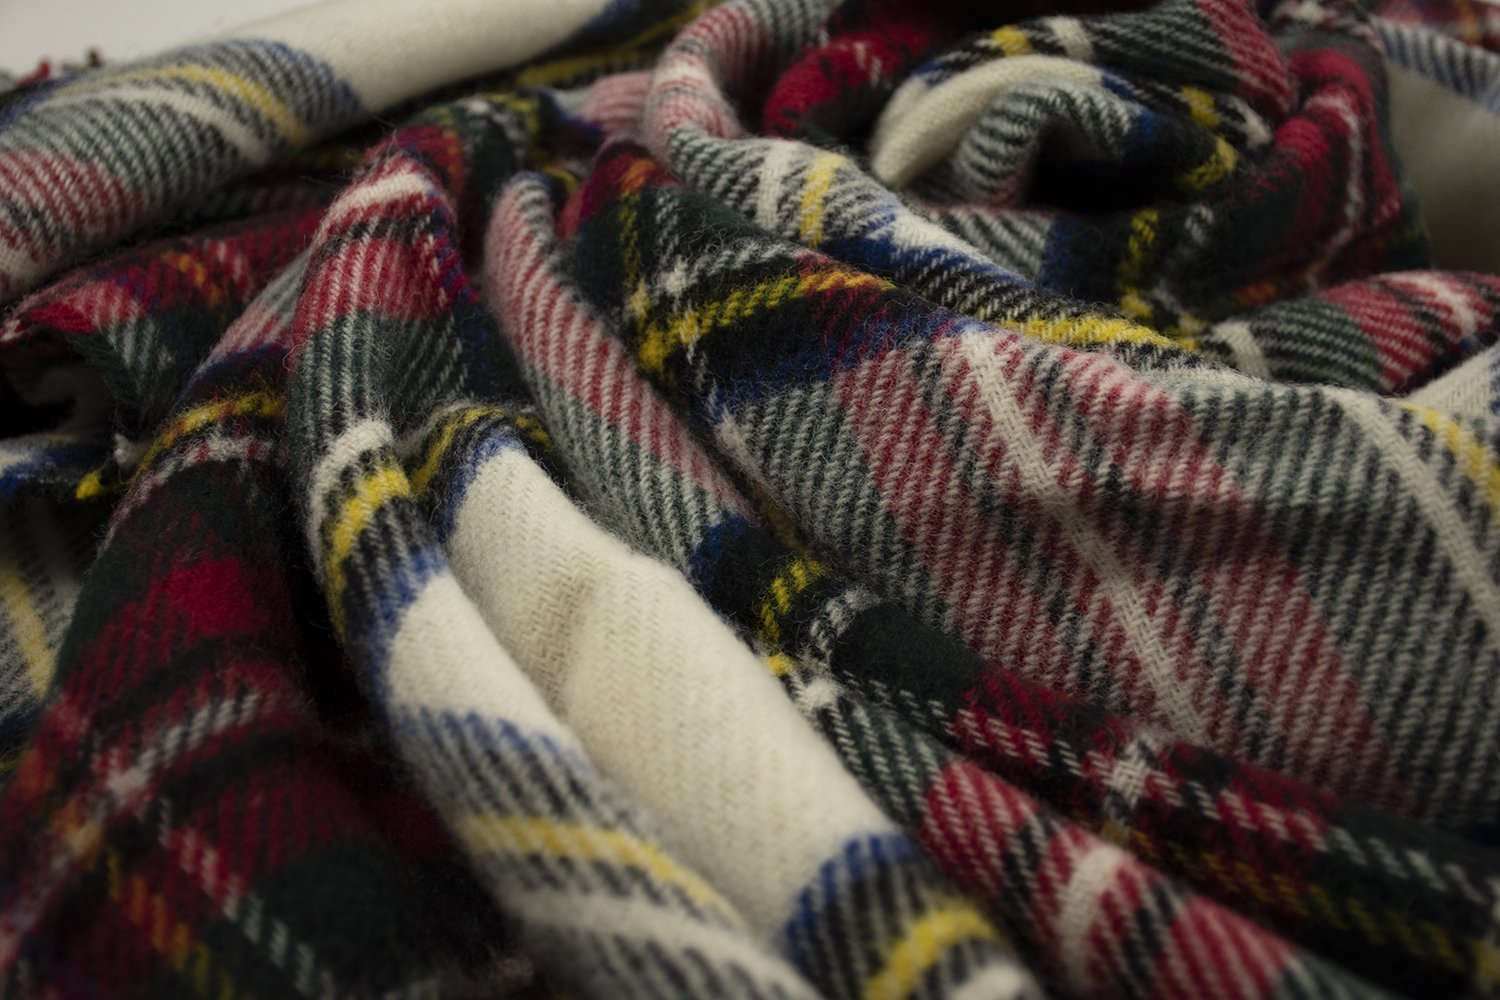 Prince of Scots Highland Tweed Pure New Wool Throw (Dress Stewart)-Throws and Blankets-Prince of Scots-810032752095-J4050028-11-Prince of Scots